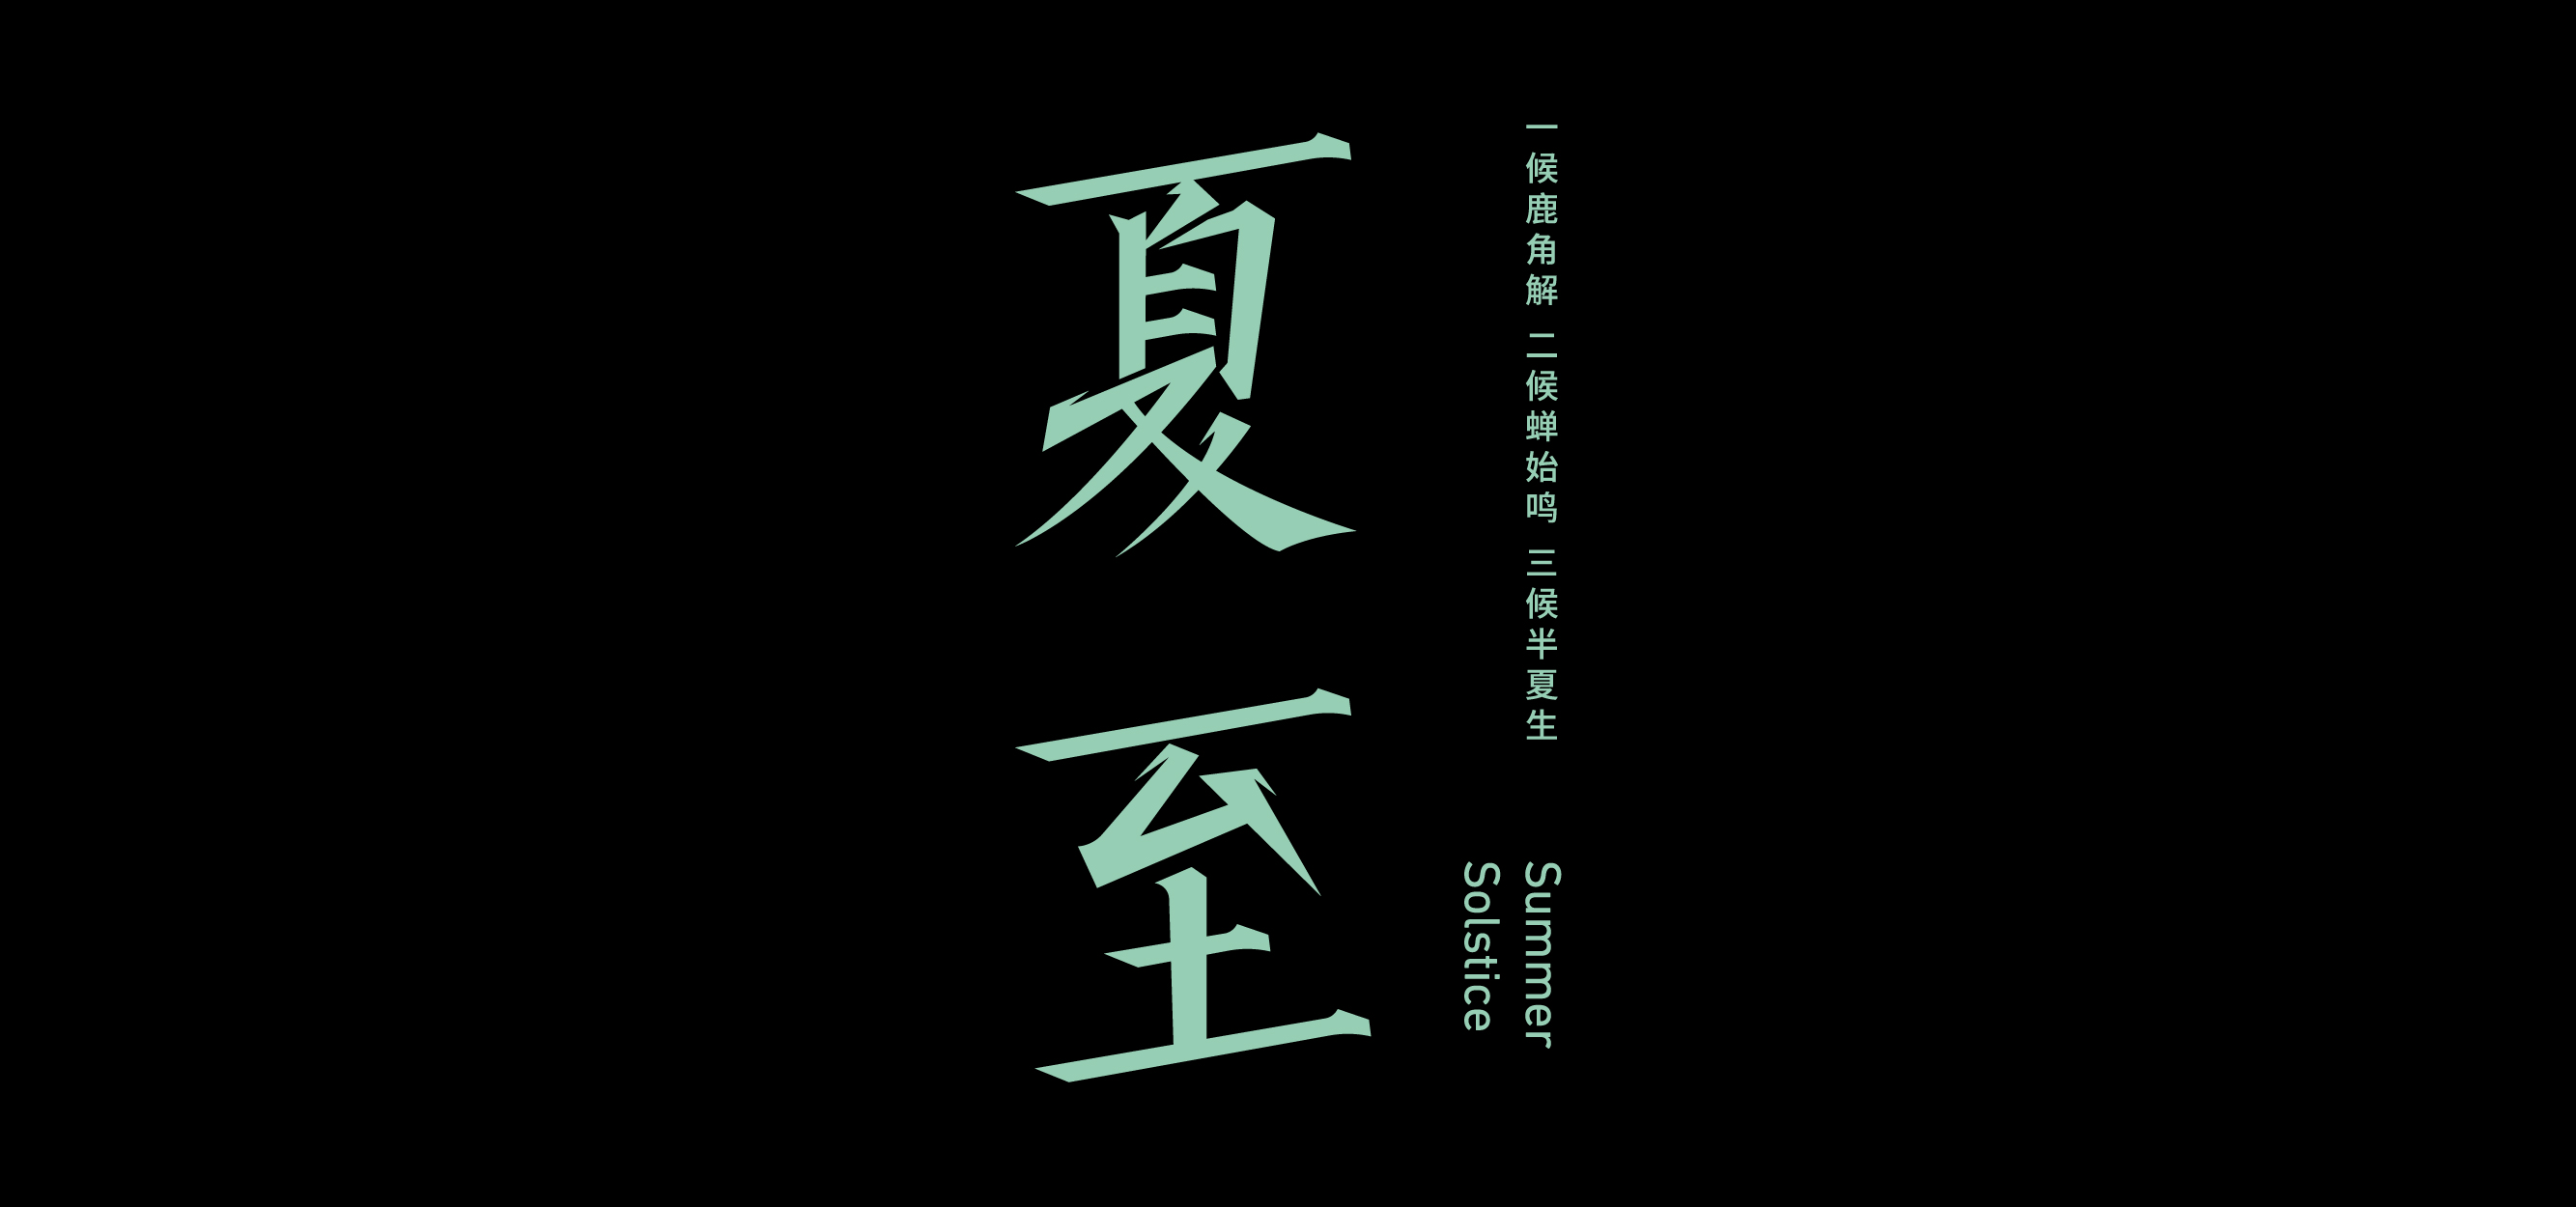 29P Collection of the latest Chinese font design schemes in 2021 #.604